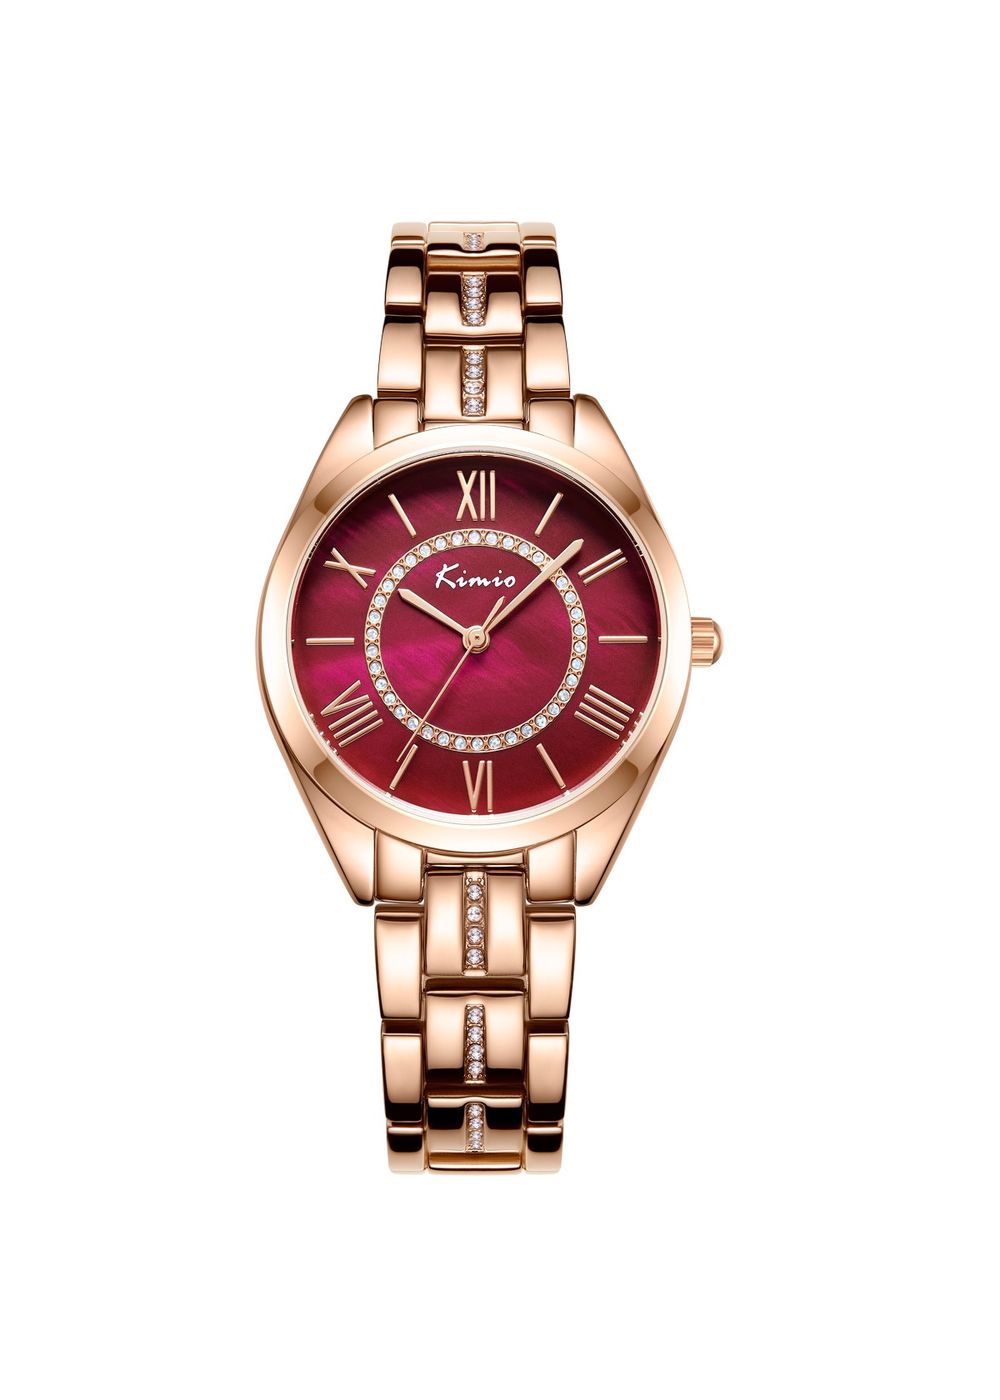 Kimio Women's Watch| Time Access Store